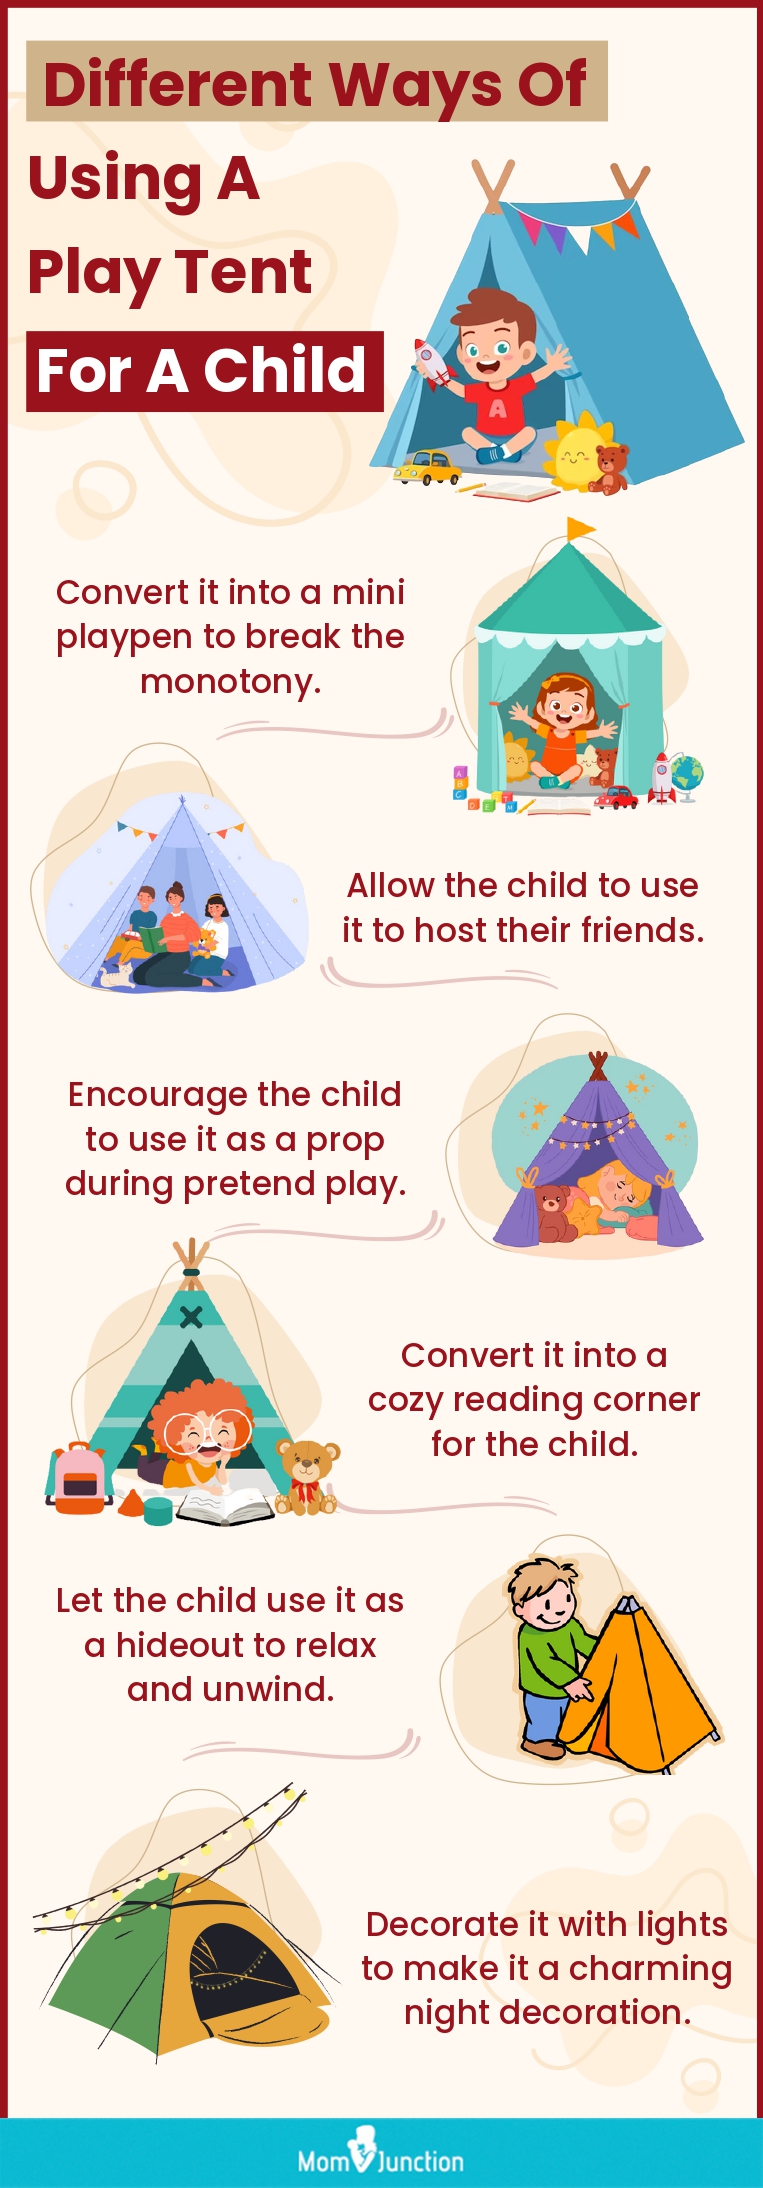 Different Ways Of Using A Play Tent For A Child (infographic)